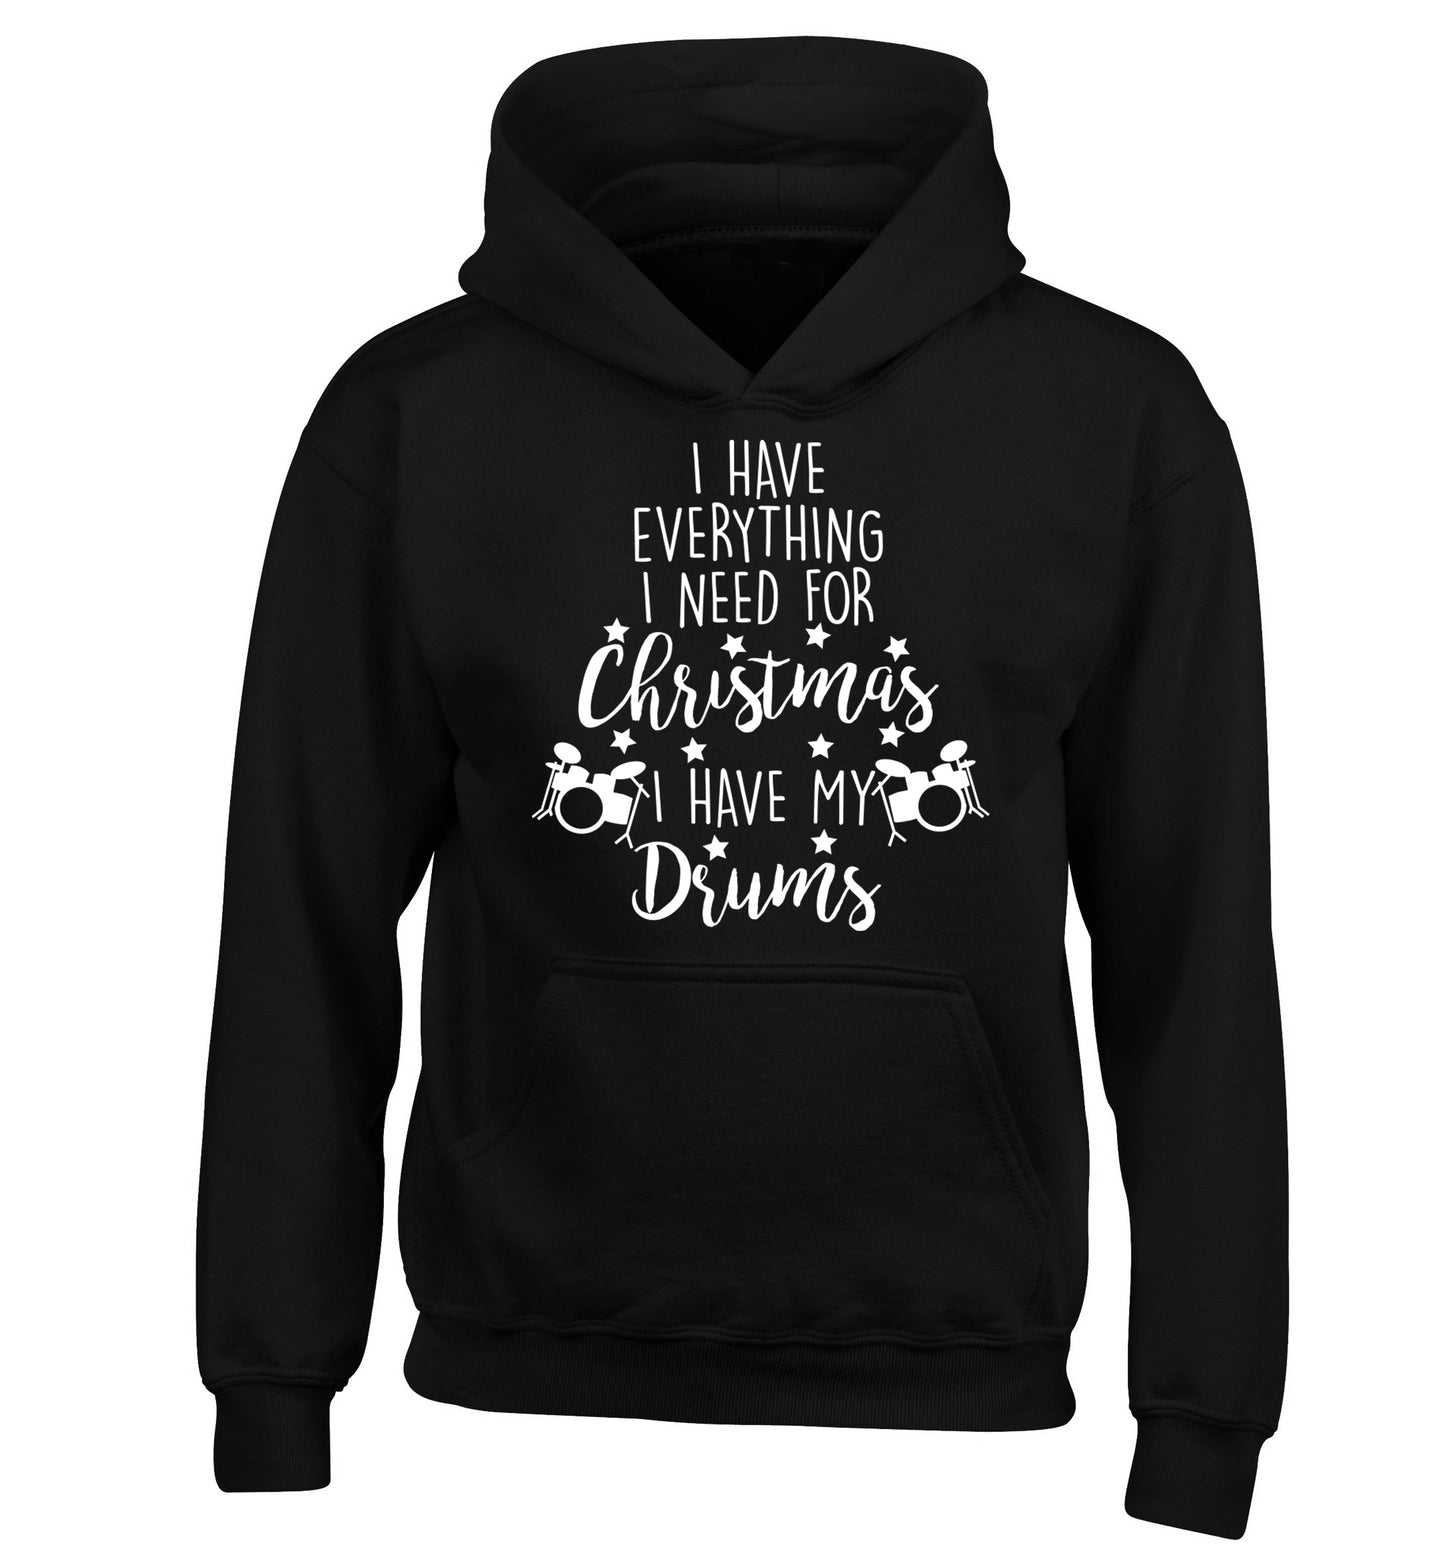 I have everything I need for Christmas I have my drums! children's black hoodie 12-14 Years